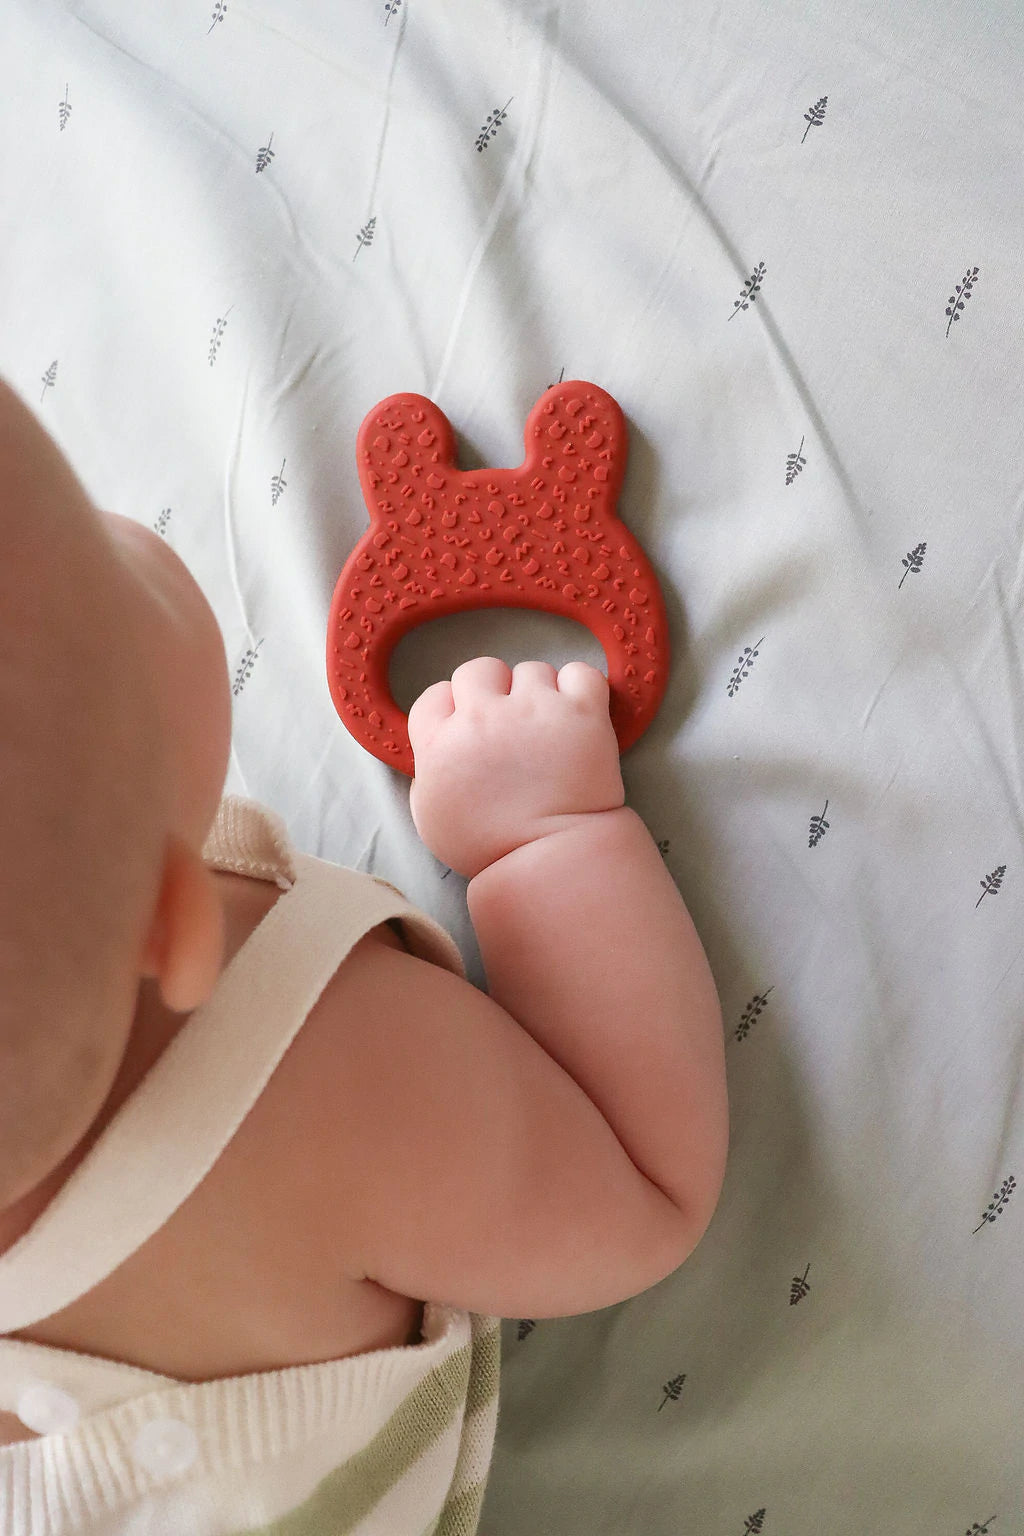 We Might Be Tiny | Silicone Teether - Bunny